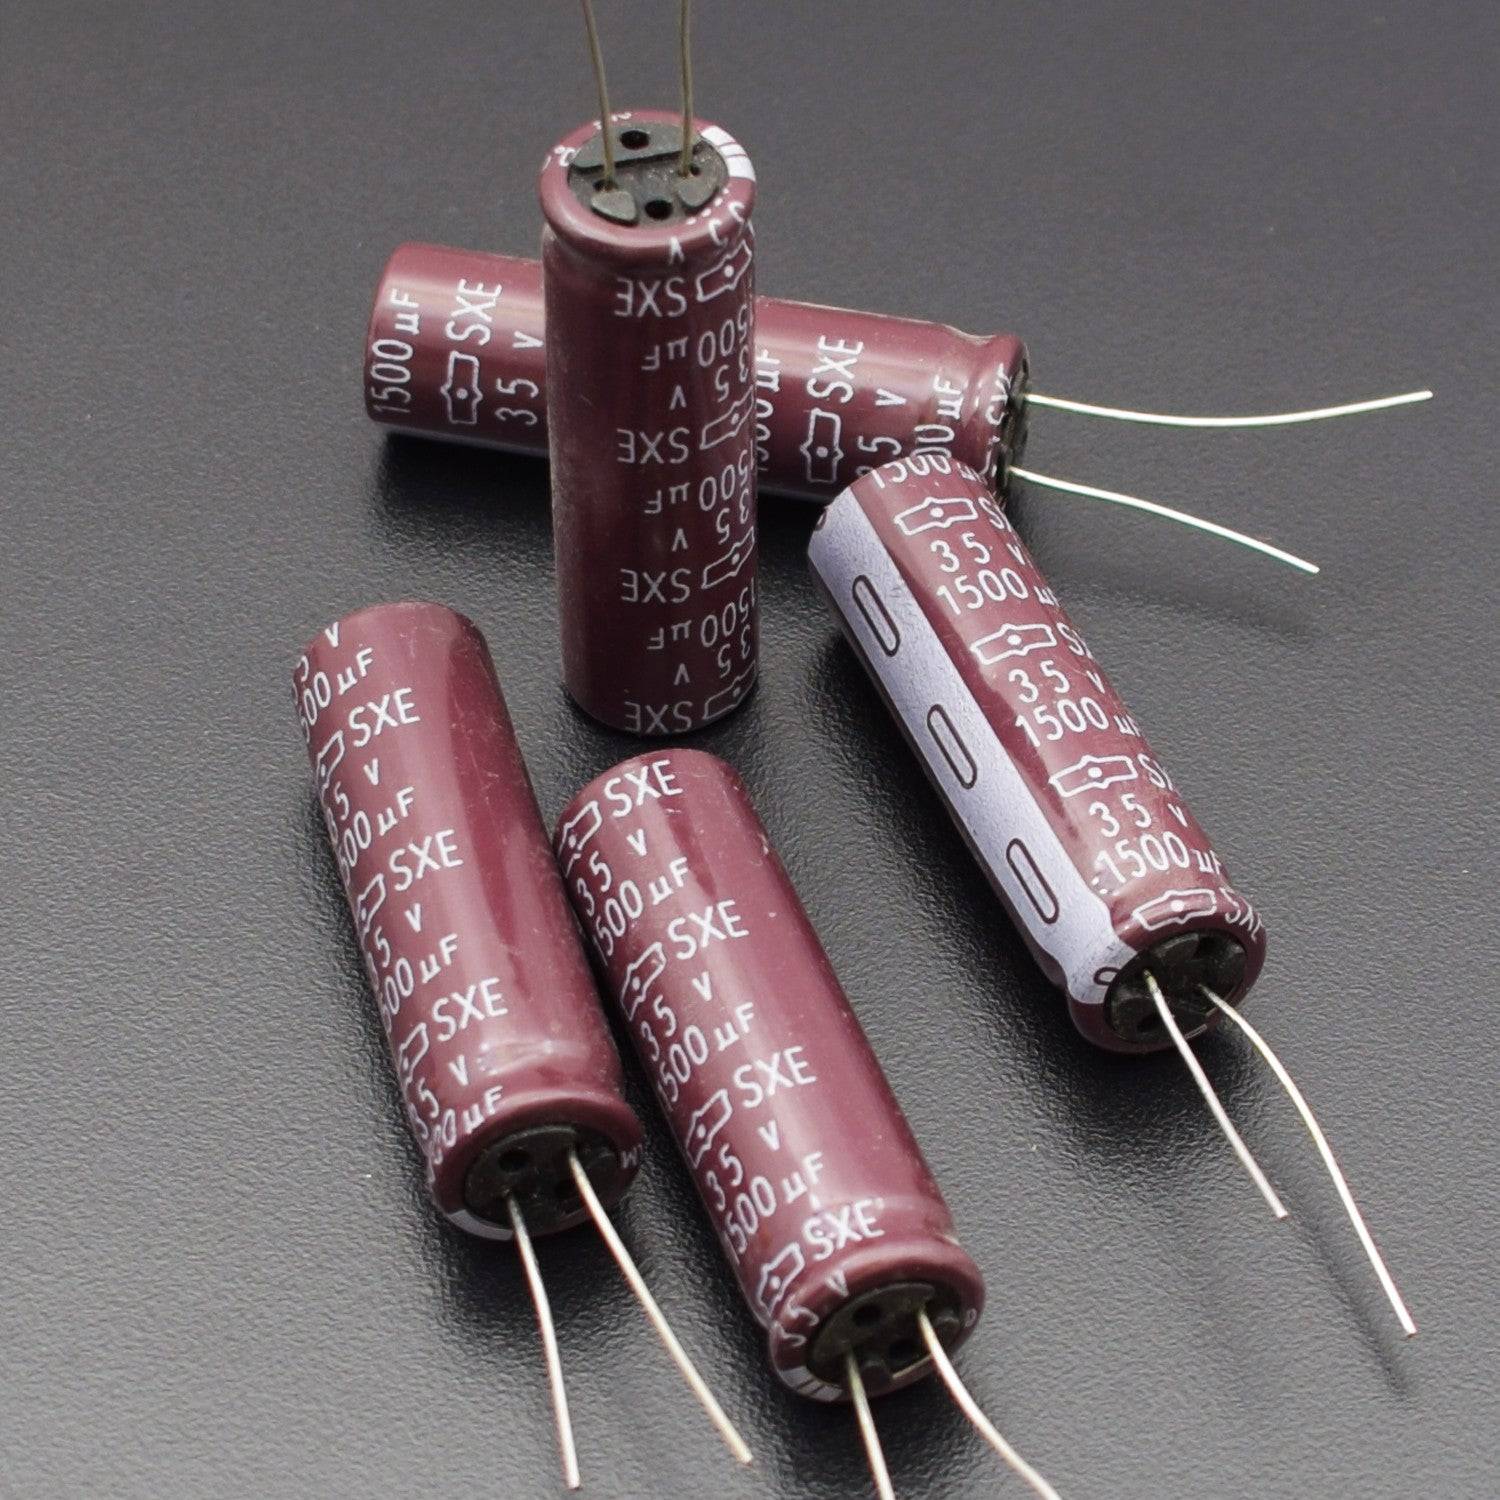 1500uF 35V Radial Electrolytic Capacitor 105°C  - RS2115 - REES52